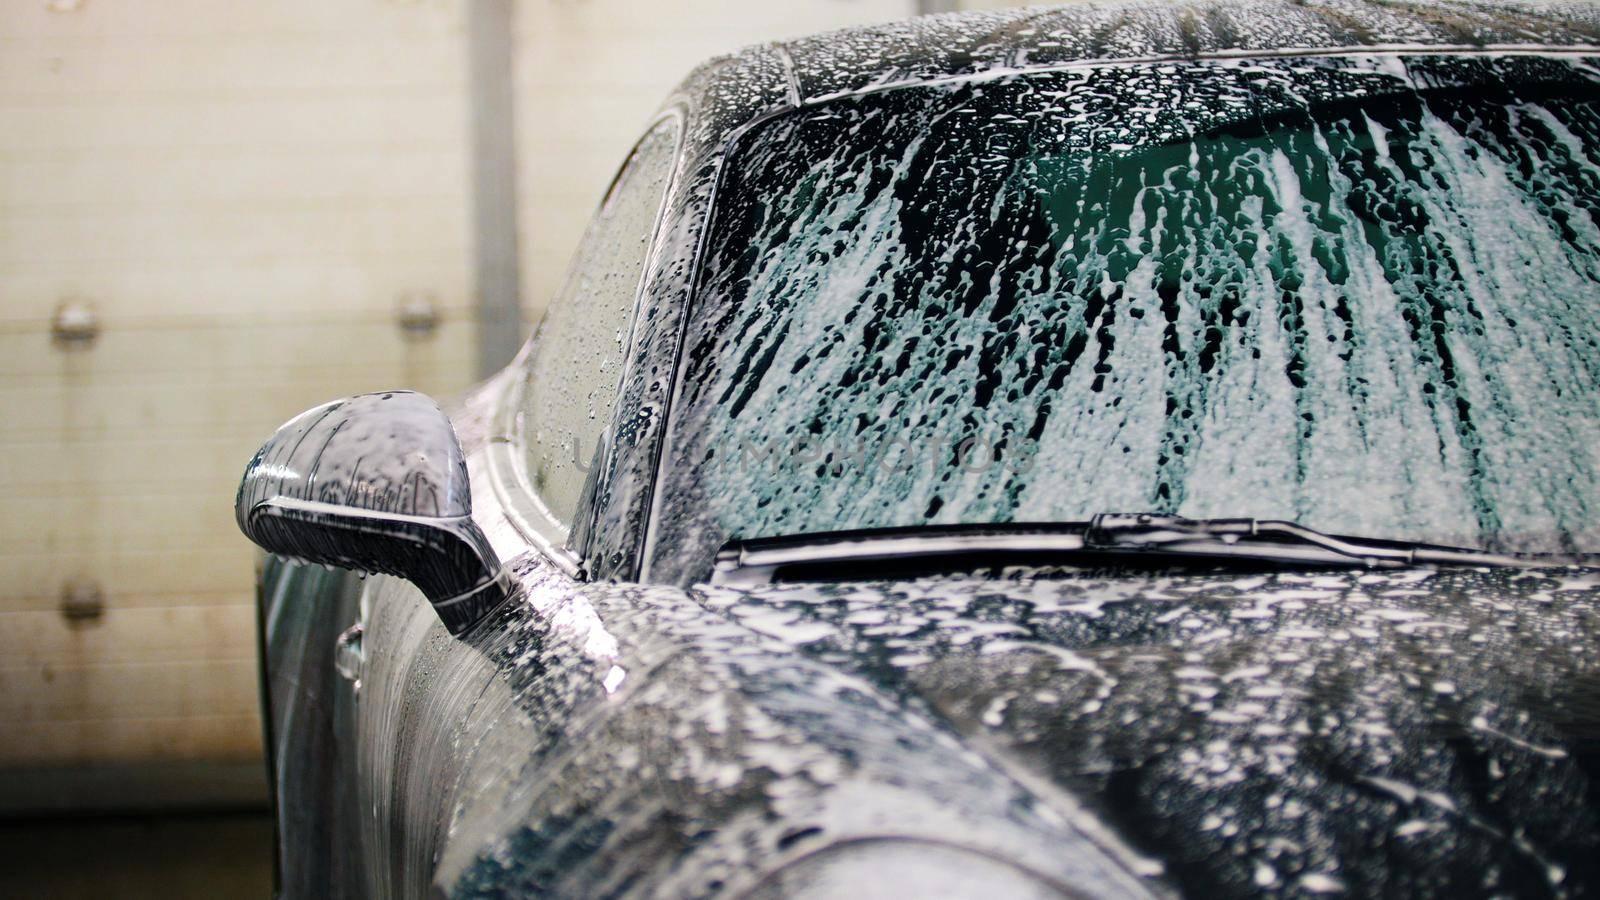 Washing a luxury car in the suds, close up